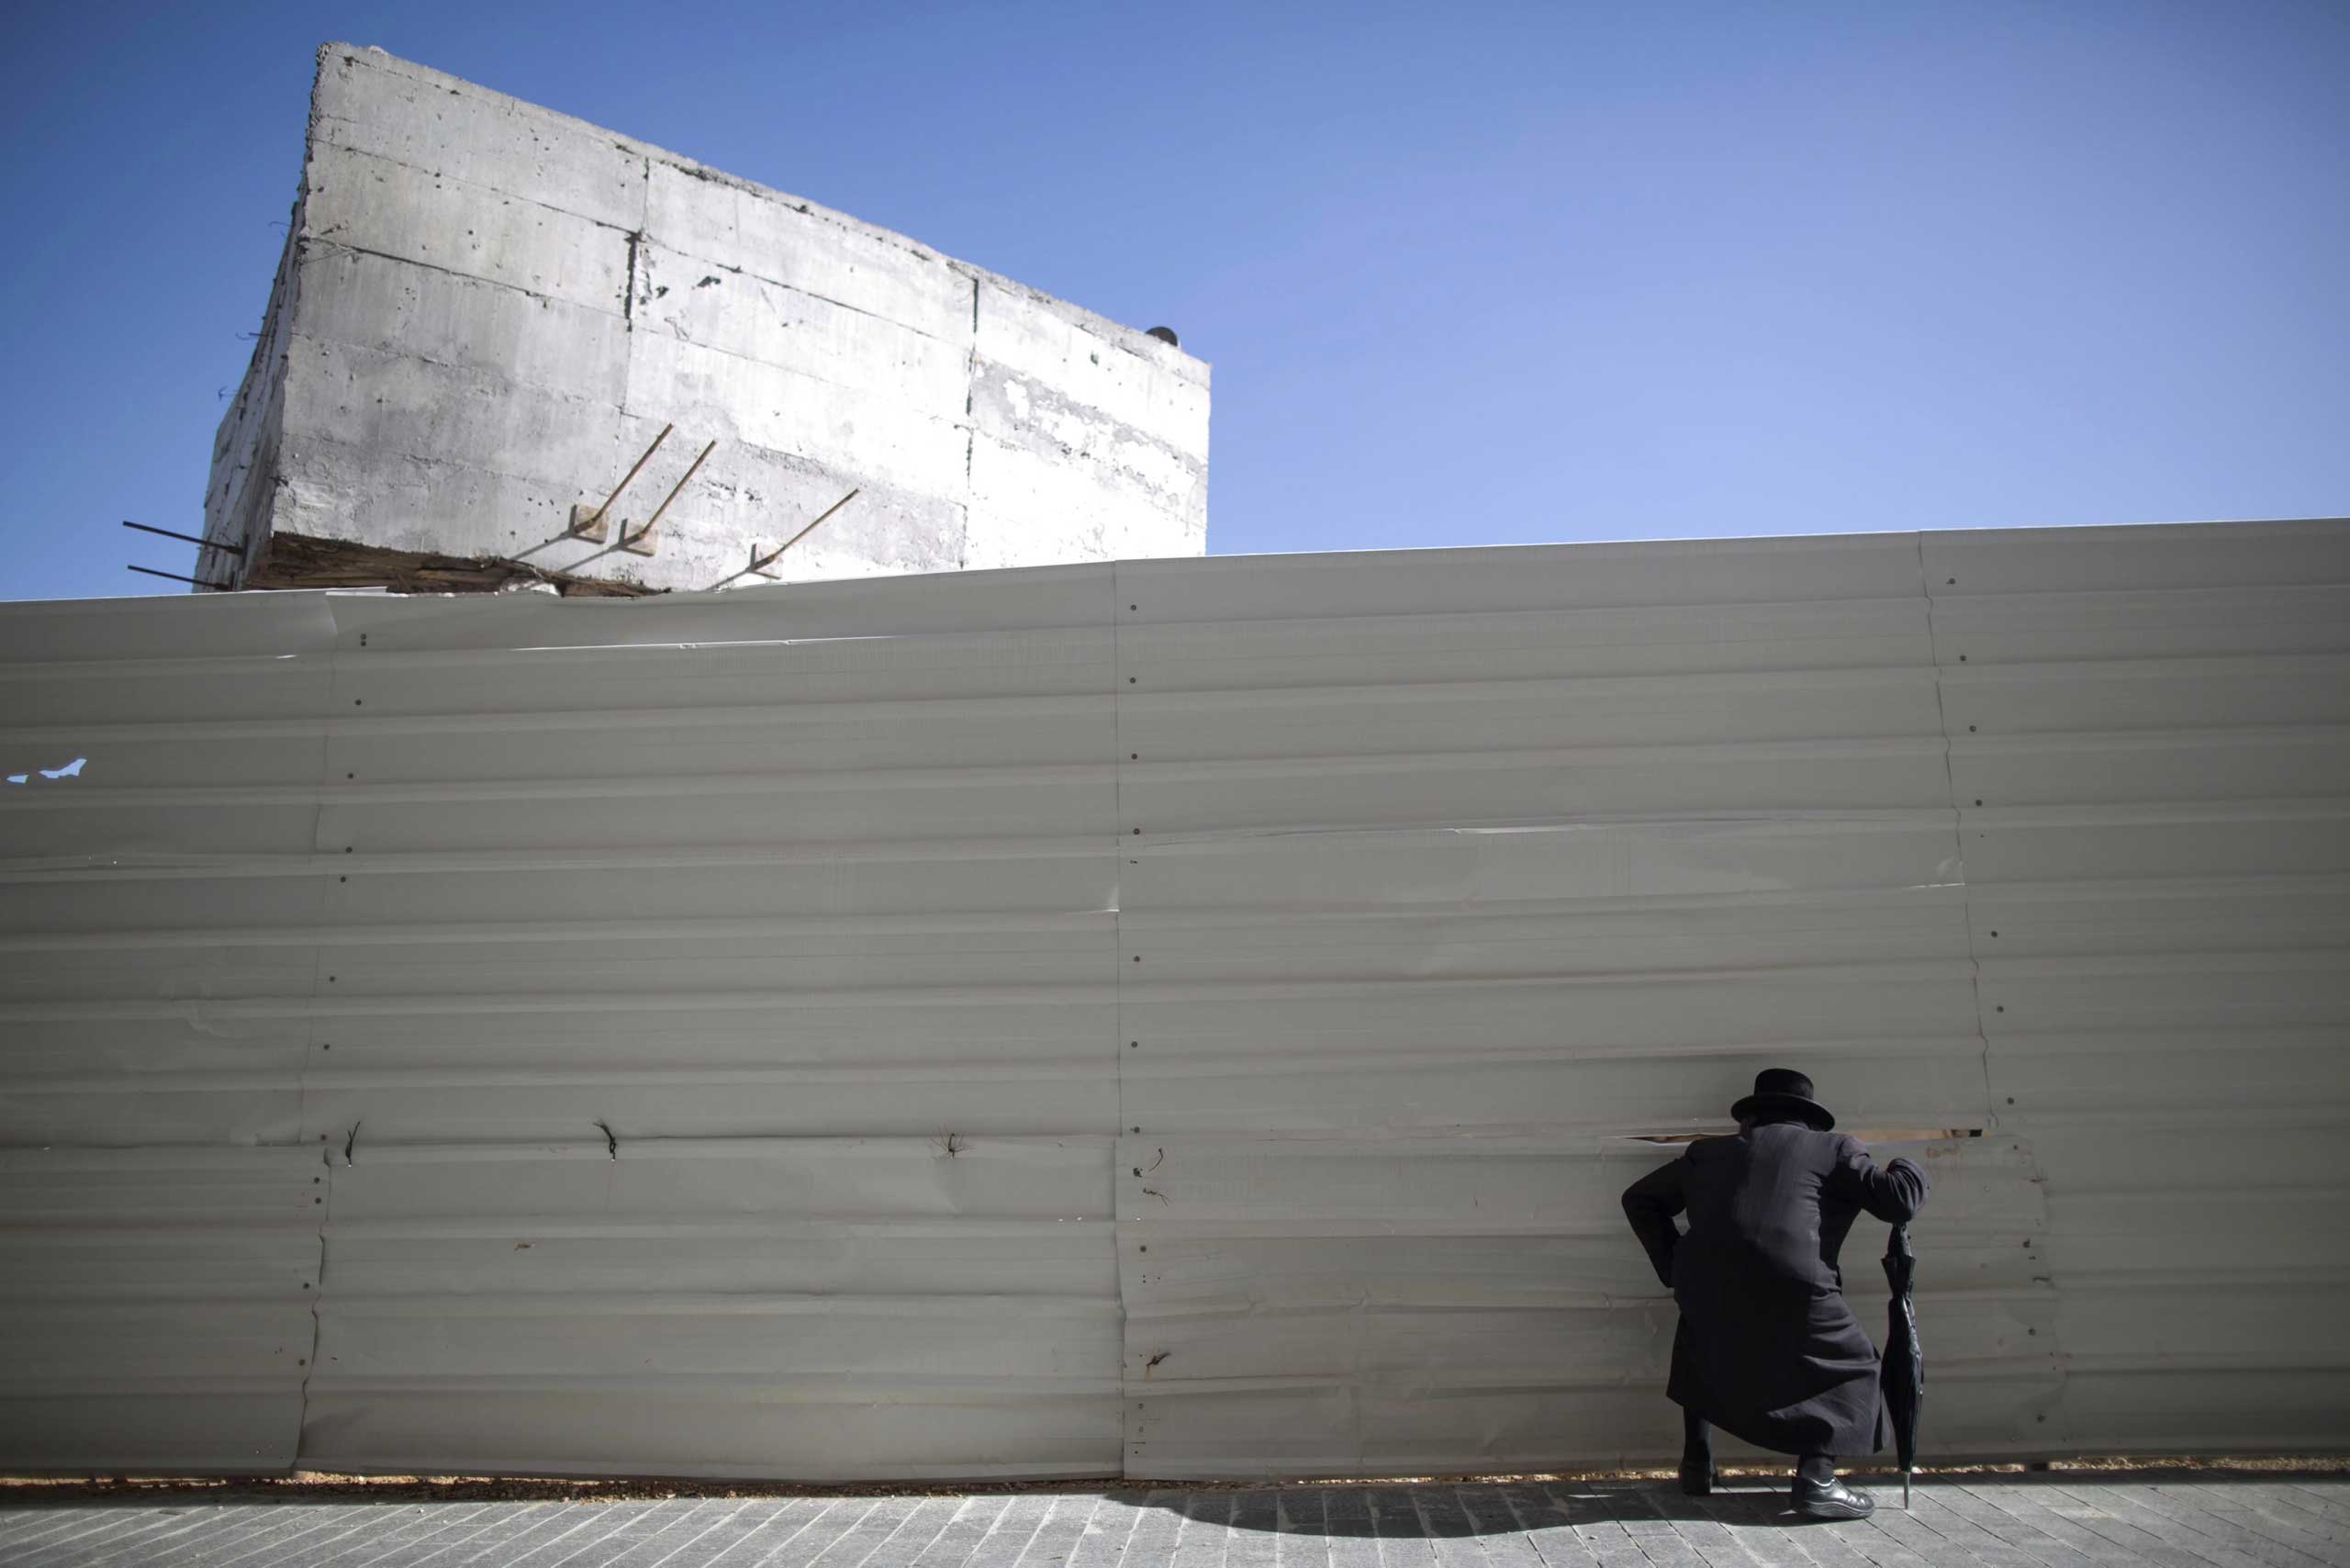 Dec. 10, 2014. An Ultra-Orthodox Jewish man peeks through fence around a new construction site in downtown Jerusalem.  Hundreds of Ultra-Orthodox Jews protested against the construction of new housing units, believing that they would be built at the site of ancient Jewish graves.